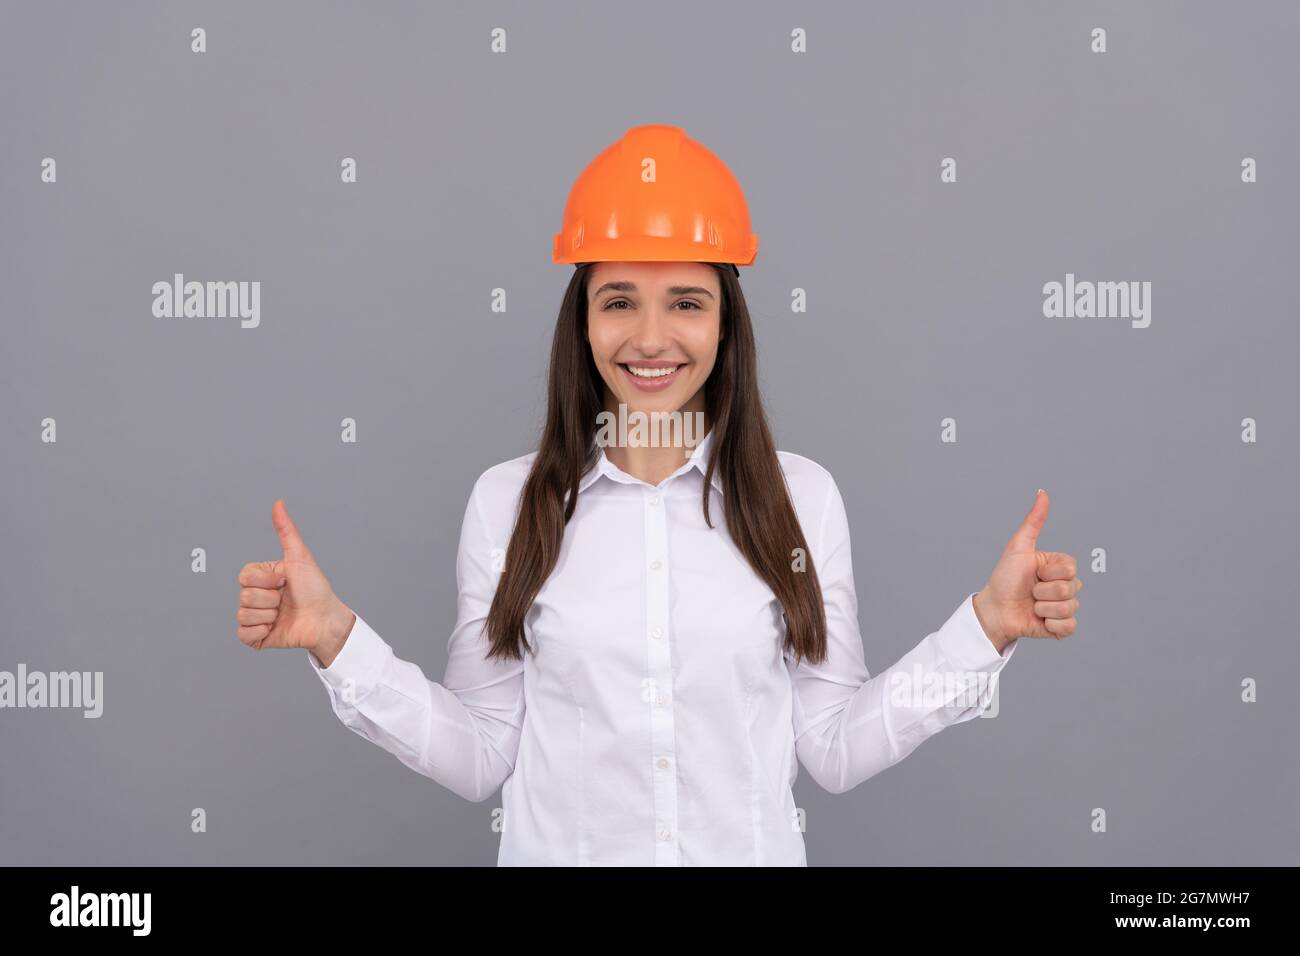 happy woman in protective helmet and white shirt showing thumb up gesture, good result Stock Photo